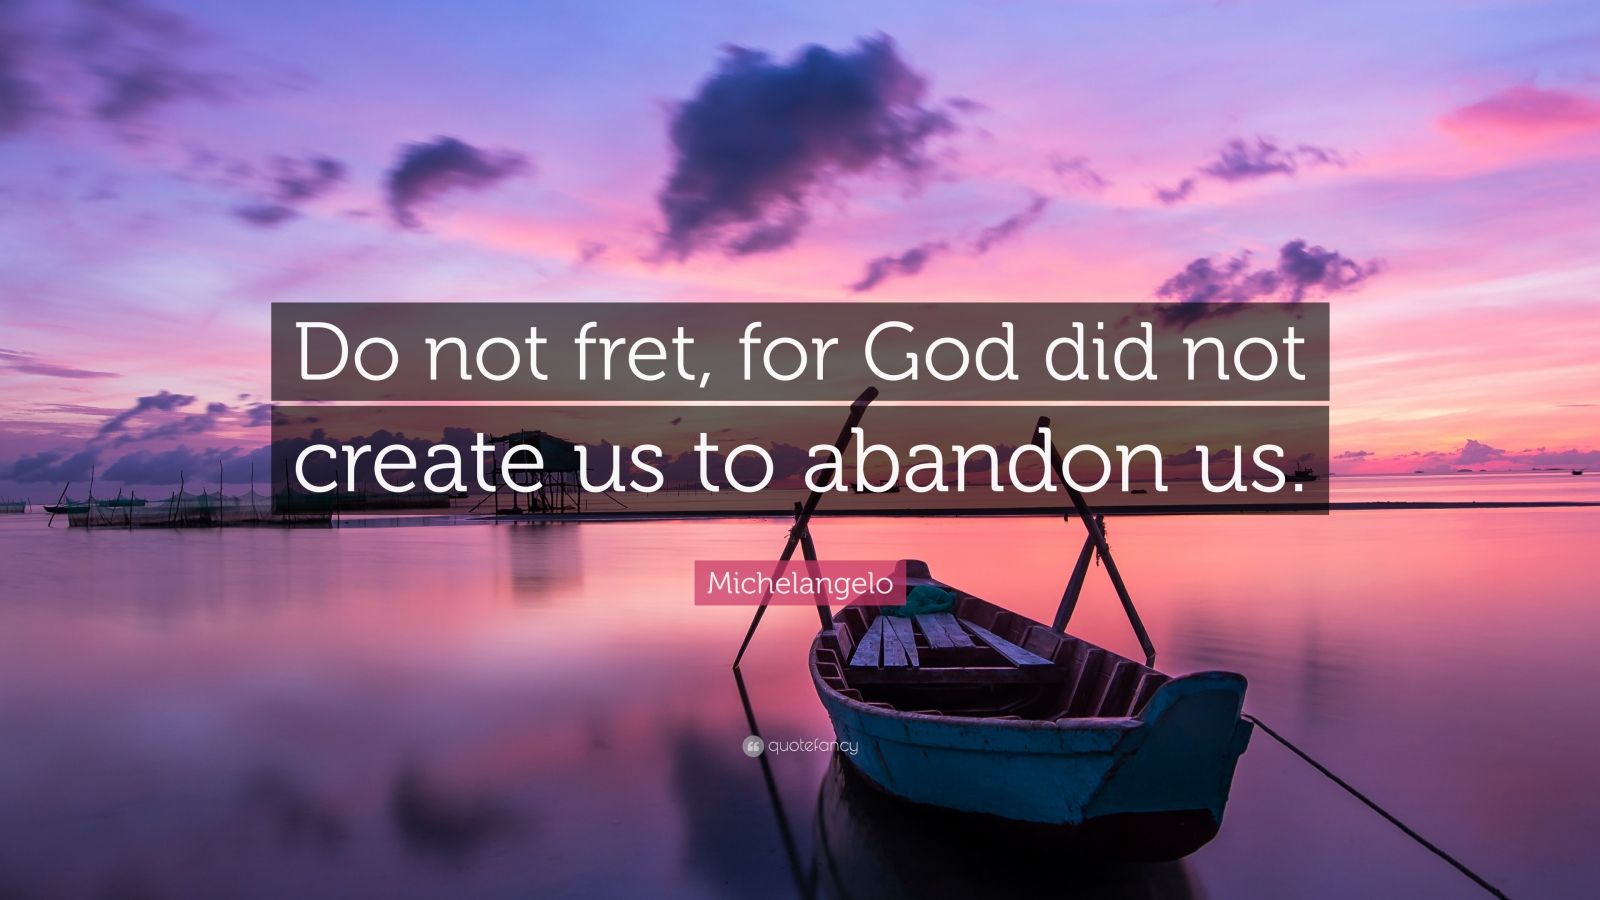 Michelangelo Quote: “Do not fret, for God did not create us to abandon ...